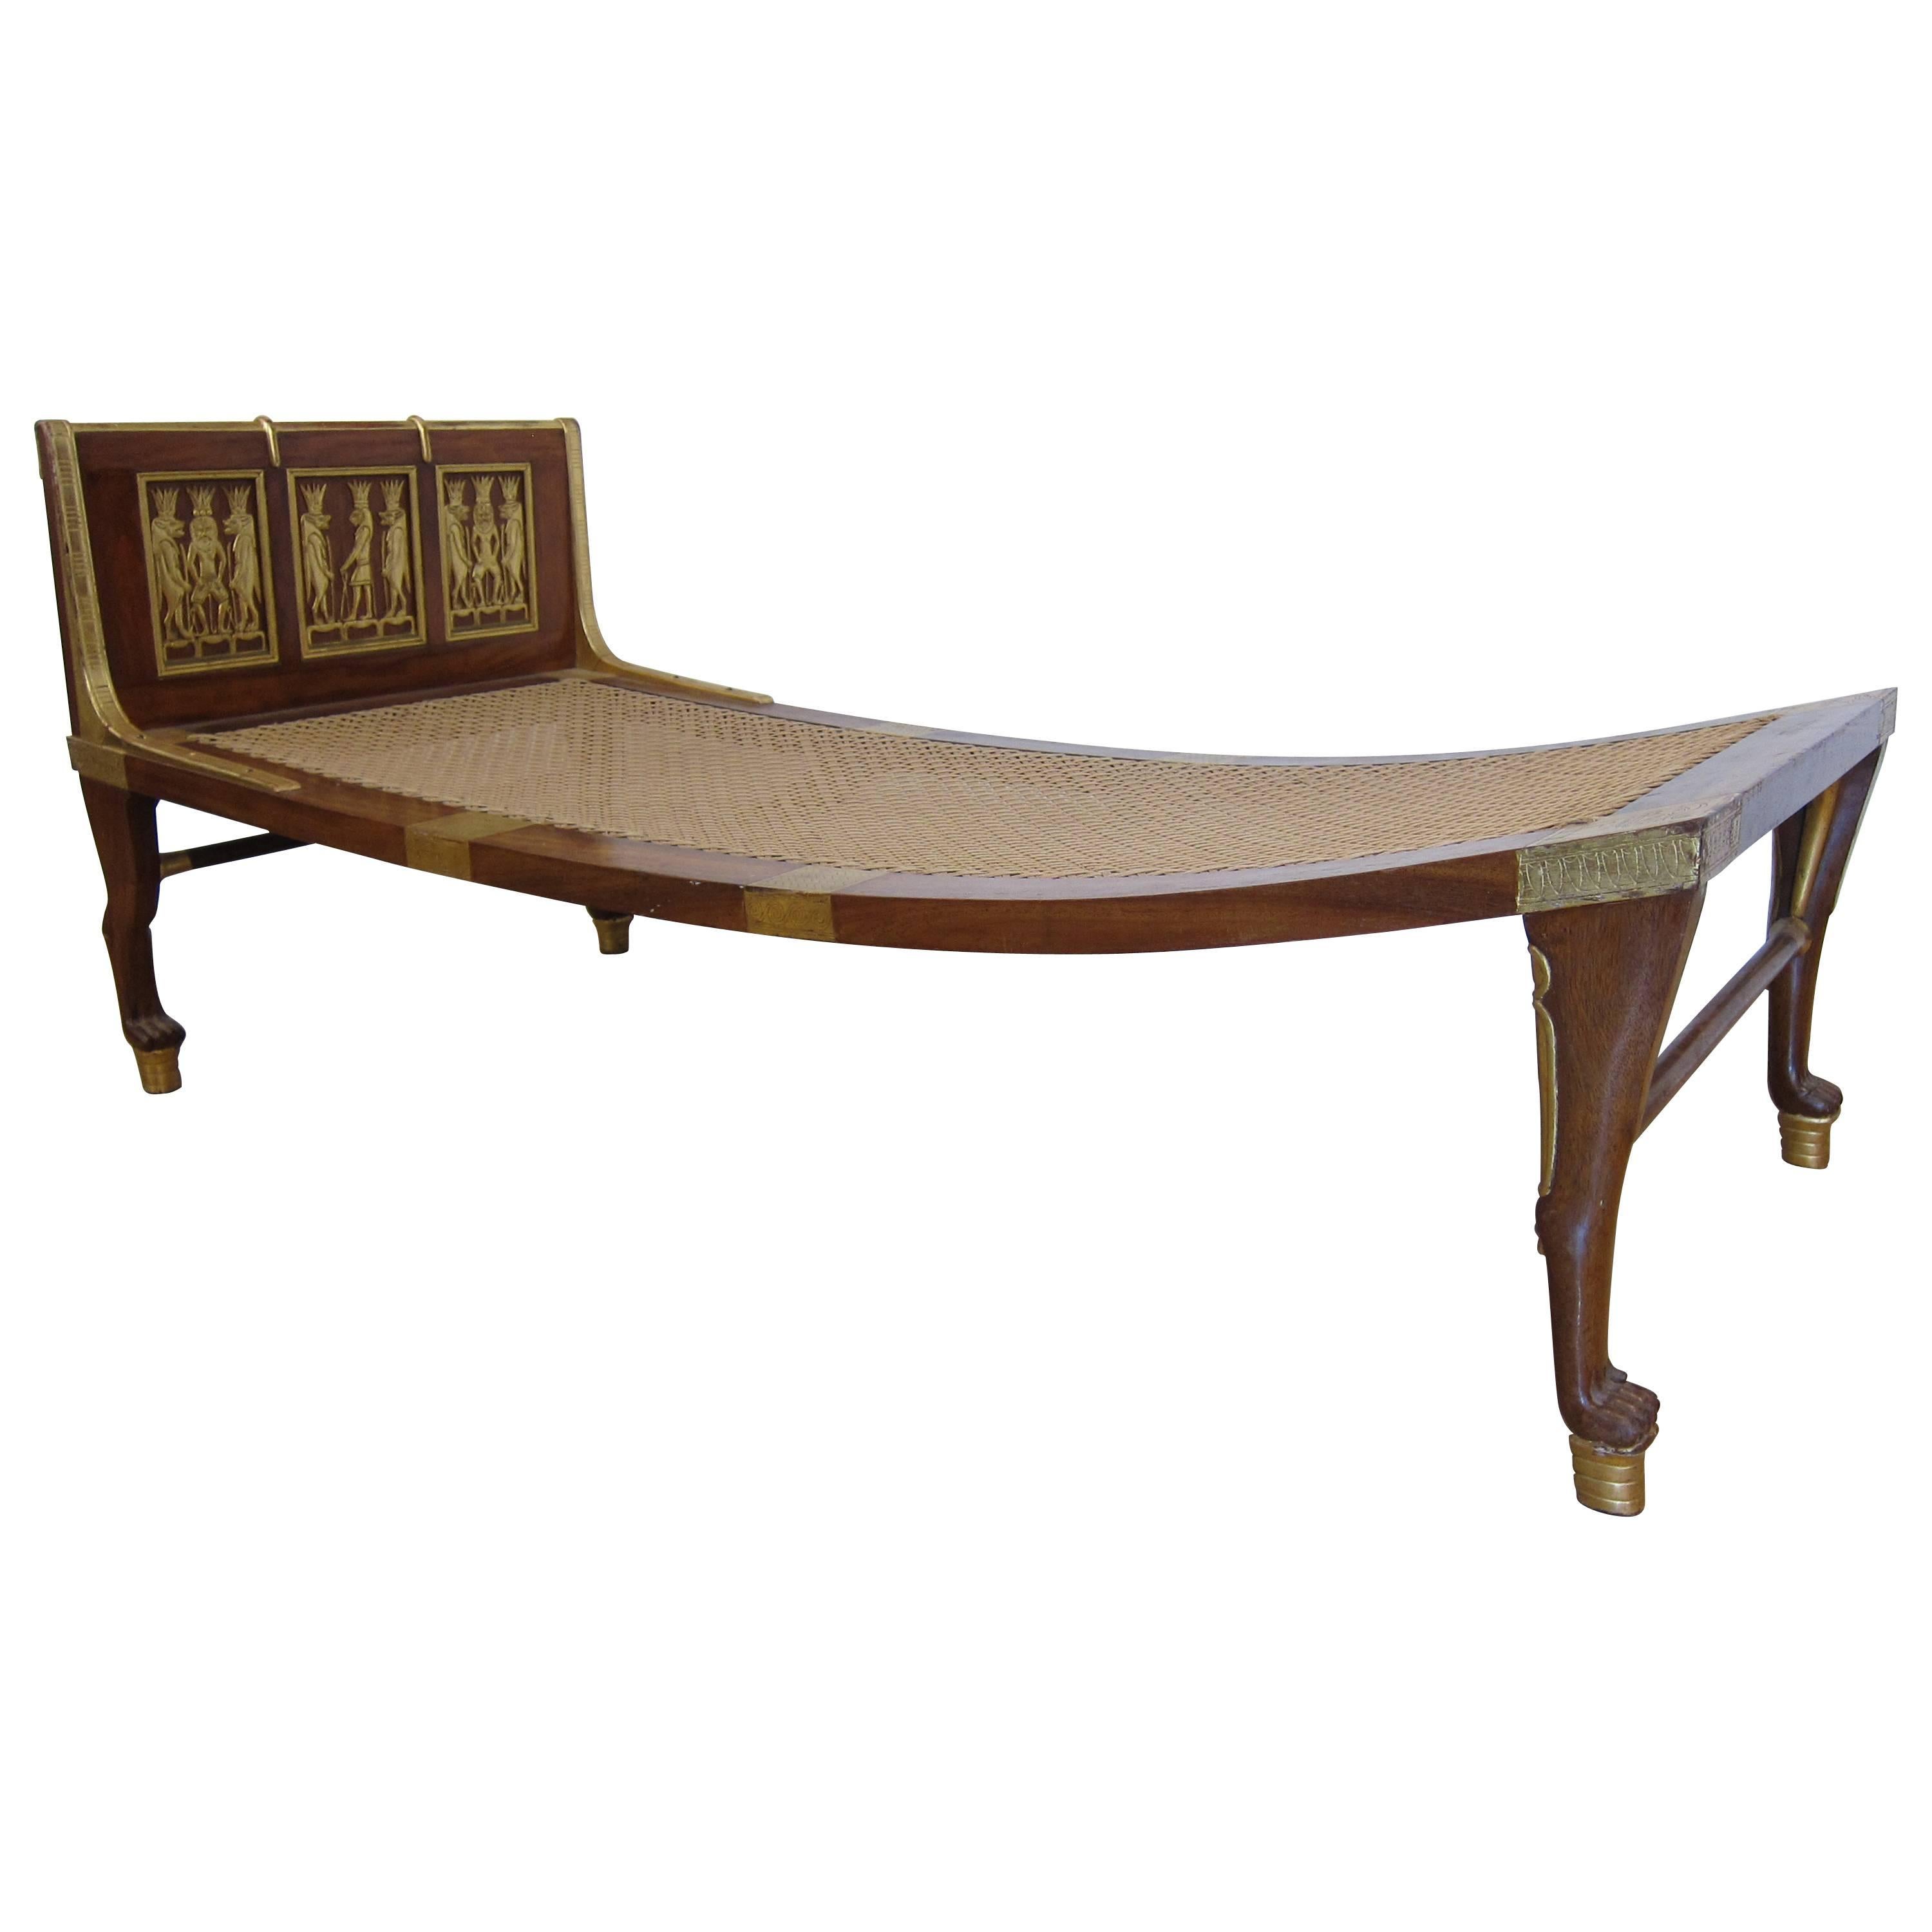 Chaise Longue Egyptian Revival Style